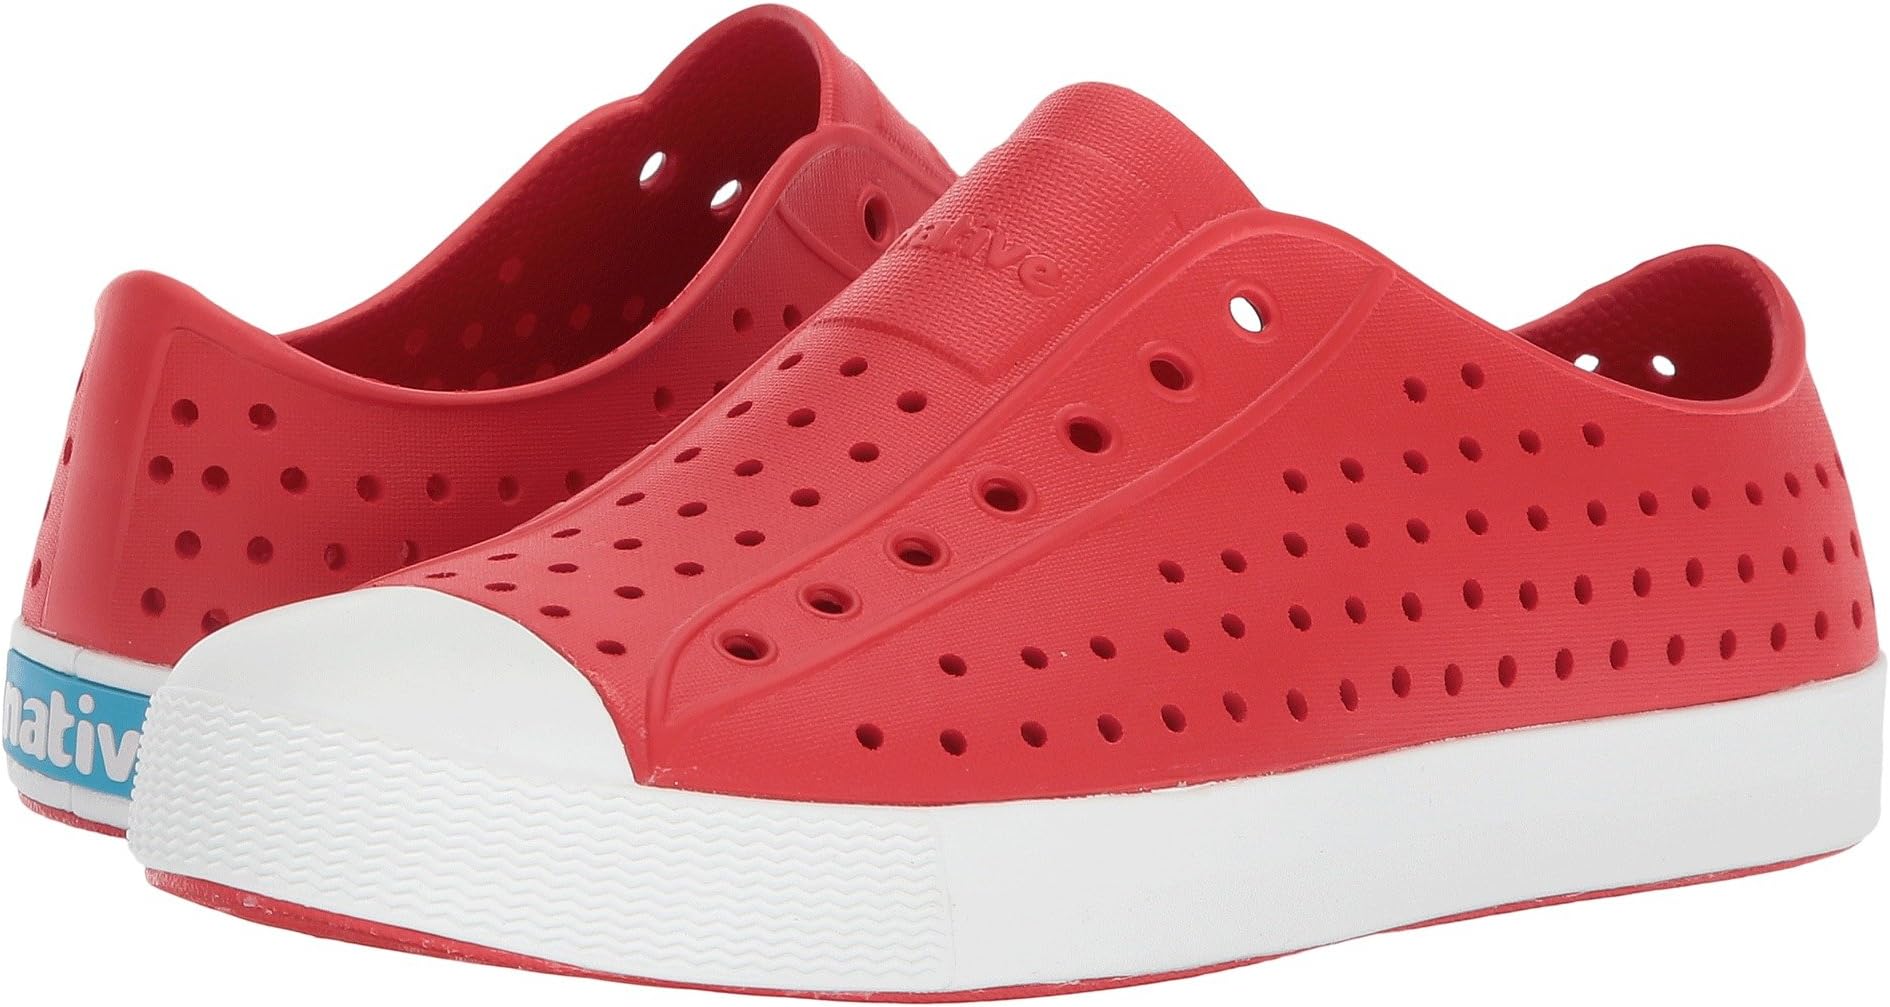 Кроссовки Jefferson Slip-on Sneakers Native Shoes Kids, цвет Torch Red/Shell White dirty dirty shoes net red ins super fire casual shoes 2021 all match leather star shoes white shoes super star women